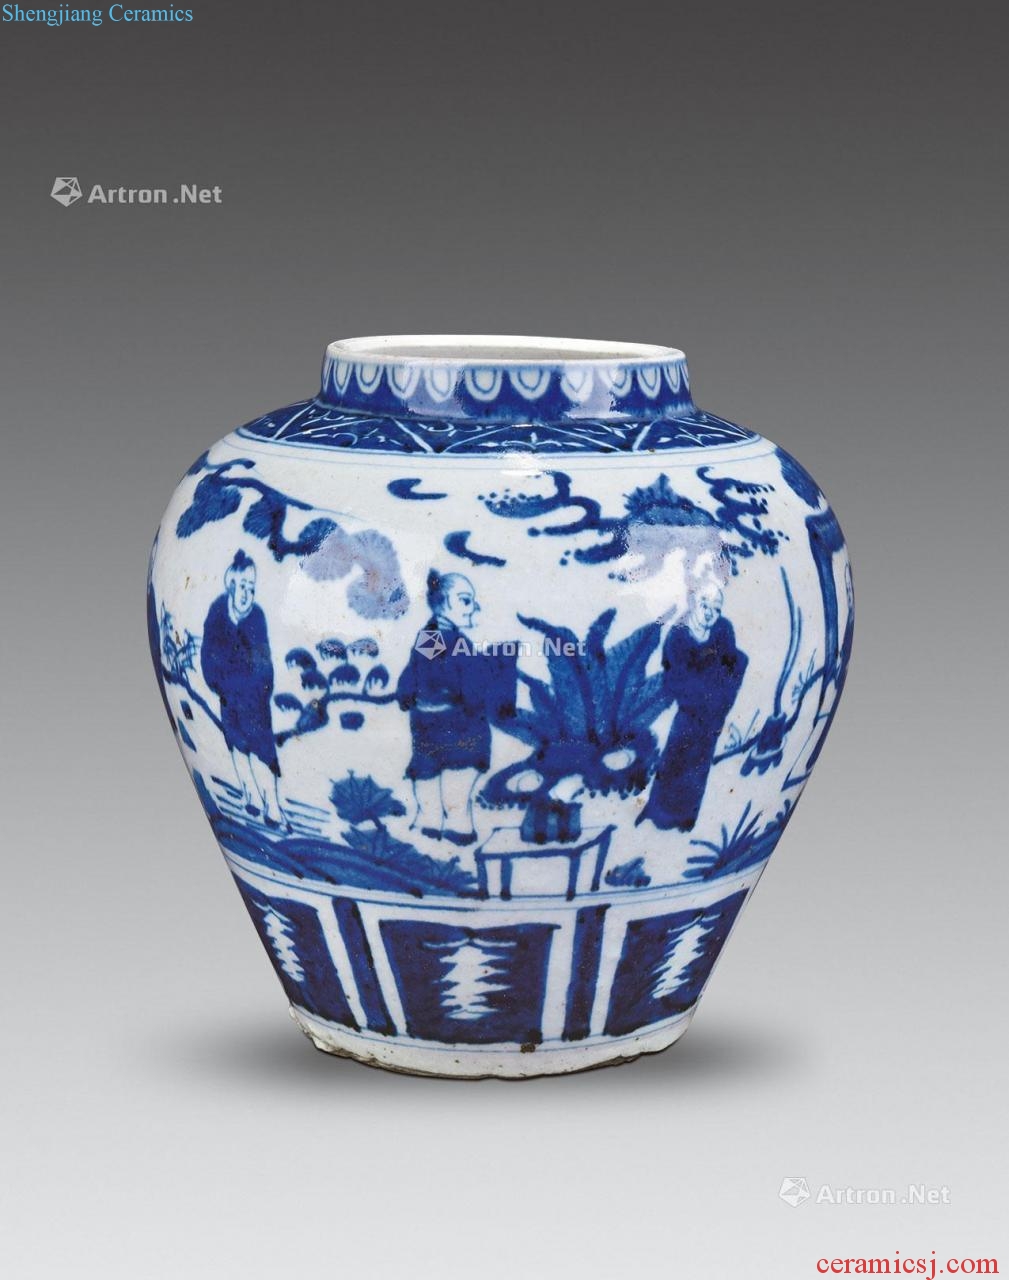 In the qing dynasty blue and white characters cans